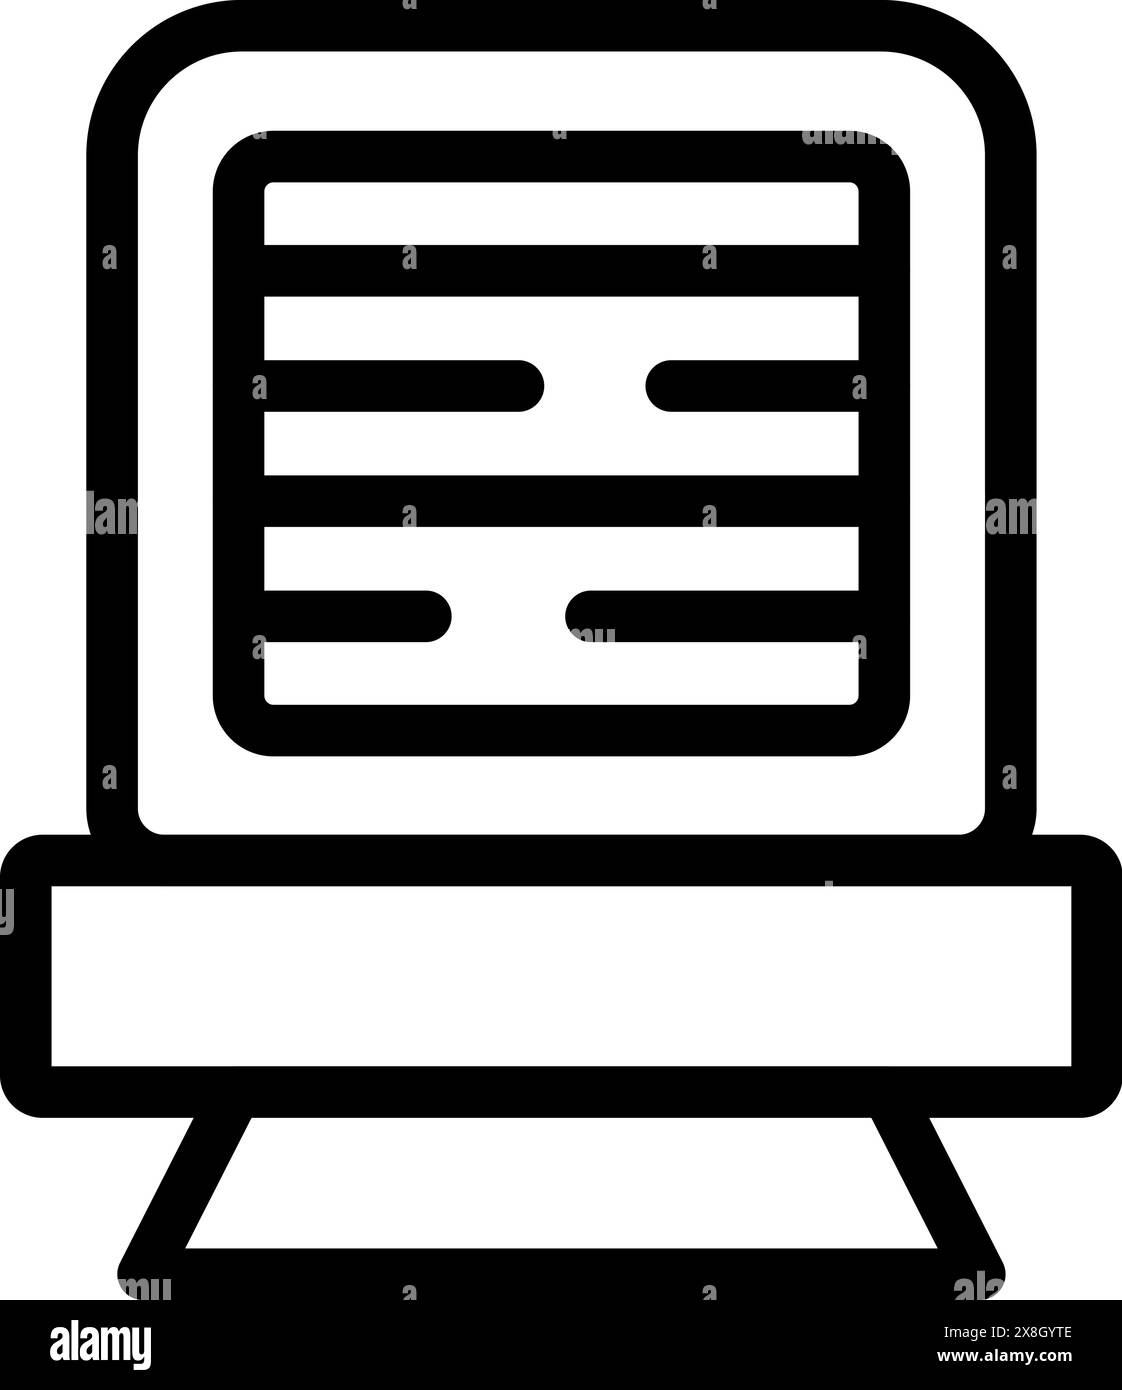 Simplified icon representing a train station's departure board in a classic black and white line art style Stock Vector